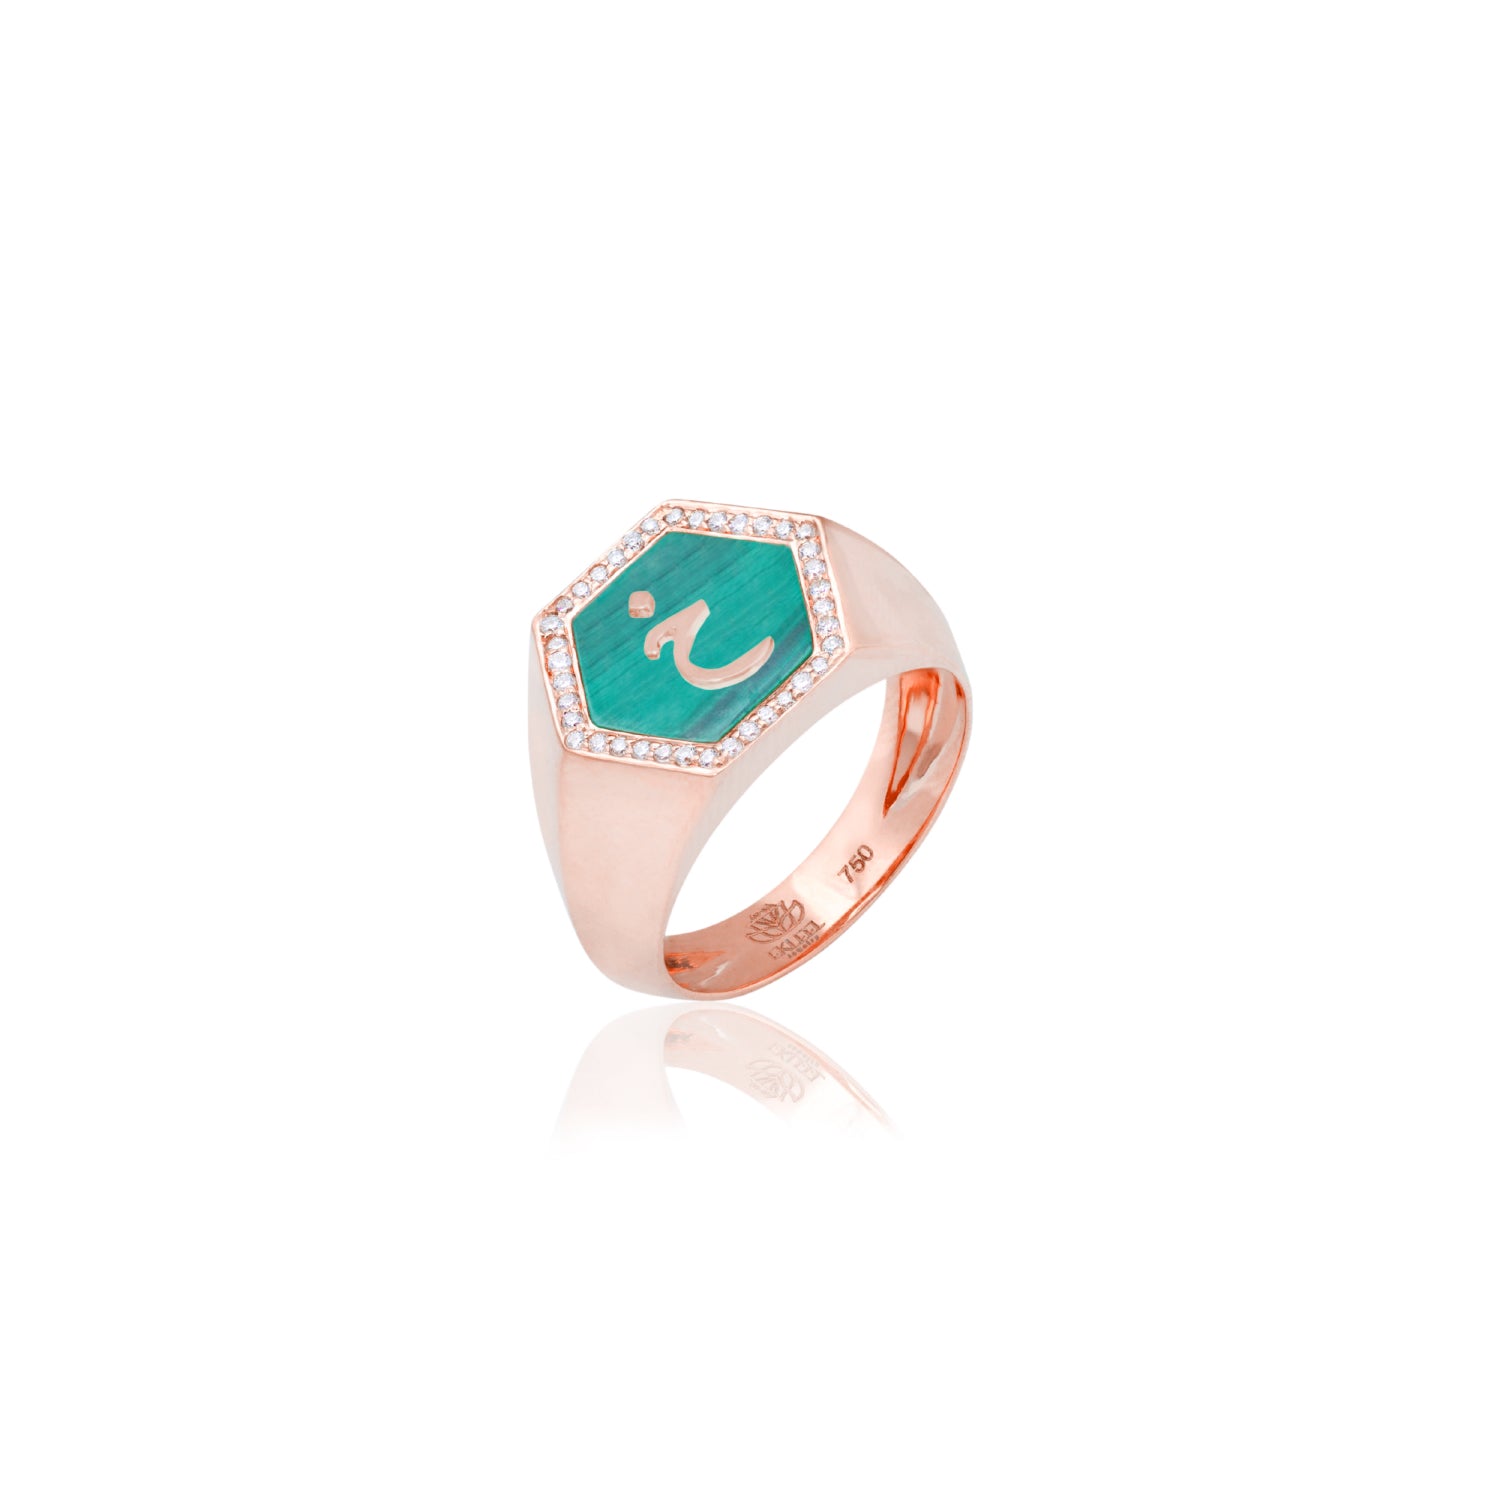 Qamoos 2.0 Letter خ Malachite and Diamond Signet Ring in Rose Gold